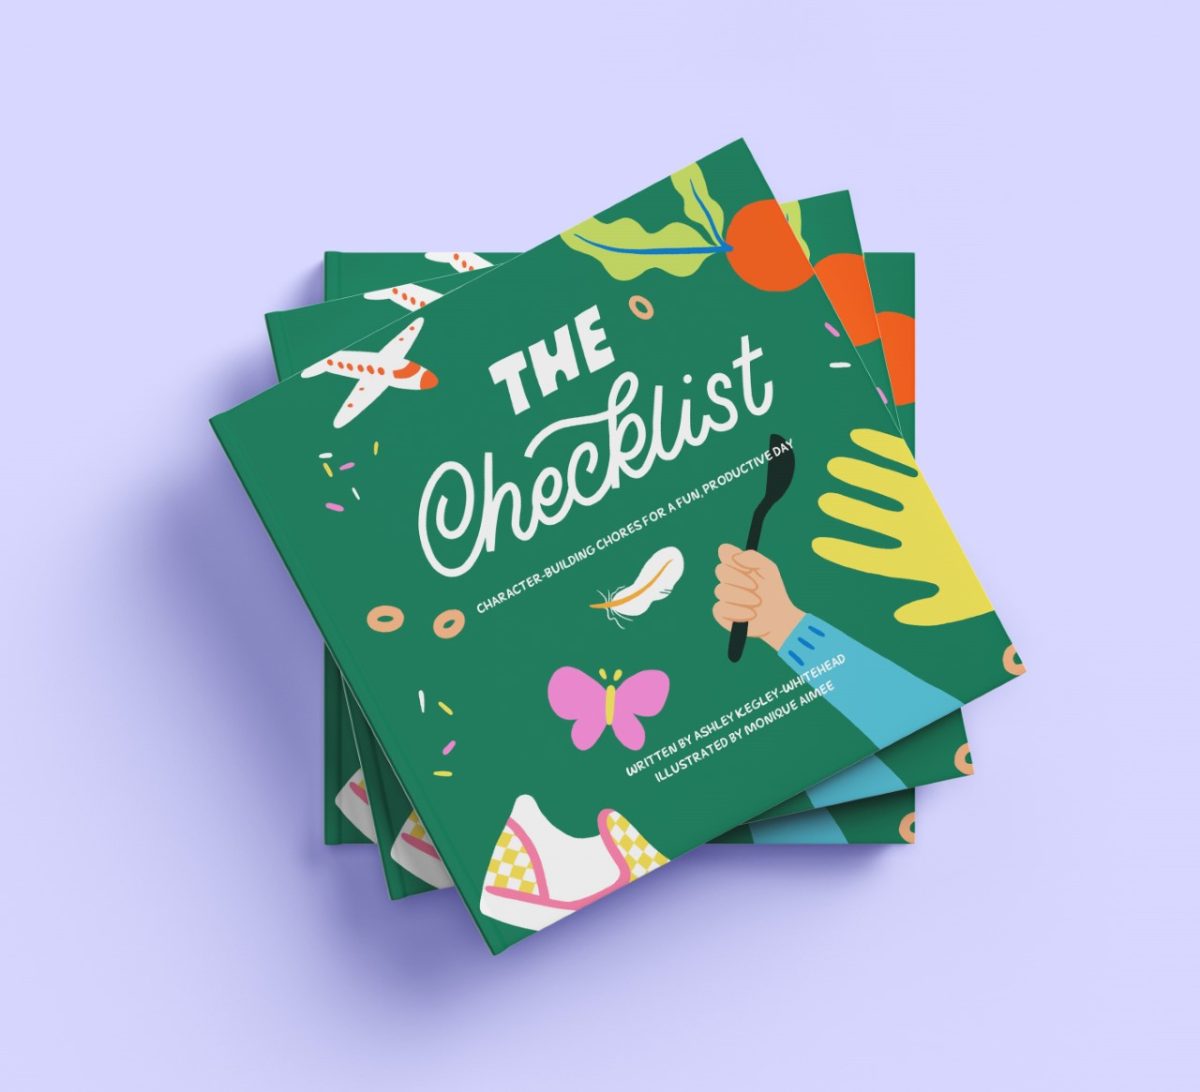 Front+cover+of+The+Checklist%3A+Character-Building+Chores+for+a+Fun%2C+Productive+Day%2C+a+childrens+book+by+Texas+State+alumna+Ashley+Kegley-Whitehead.+The+book+aims+to+teach+children+about+work+ethic+through+the+act+of+chores.